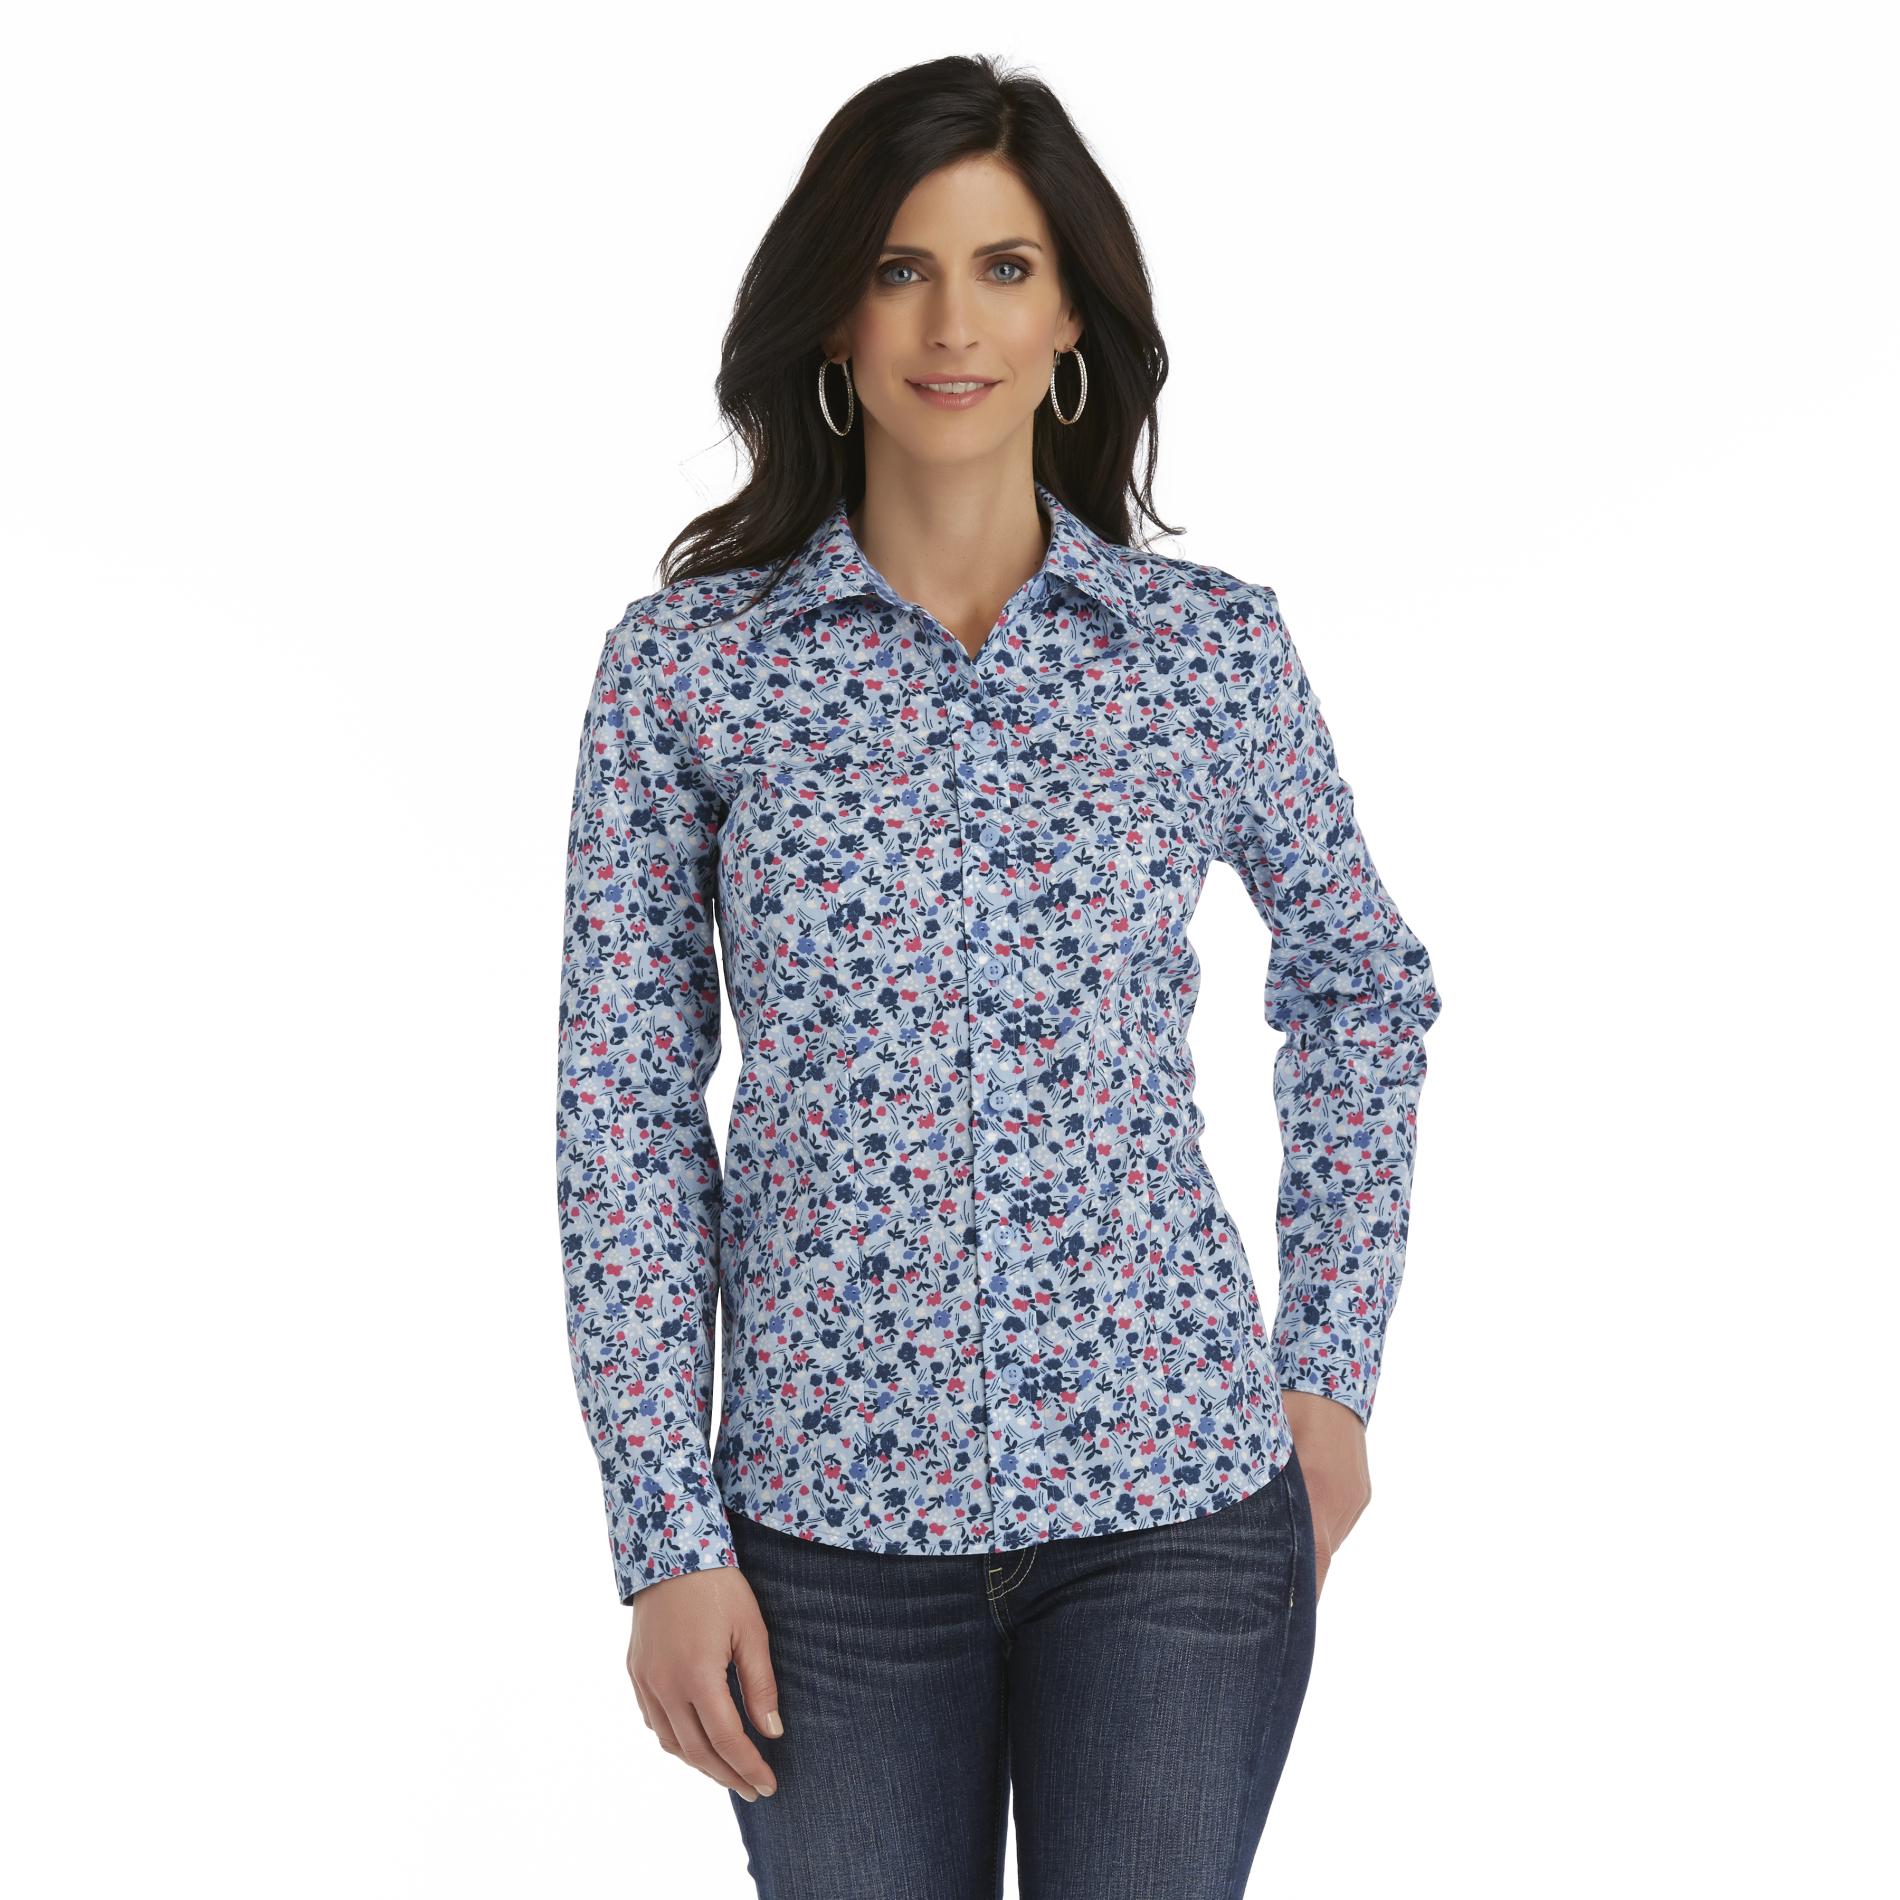 Basic Editions Women's Easy-Care Long-Sleeve Blouse - Floral Print